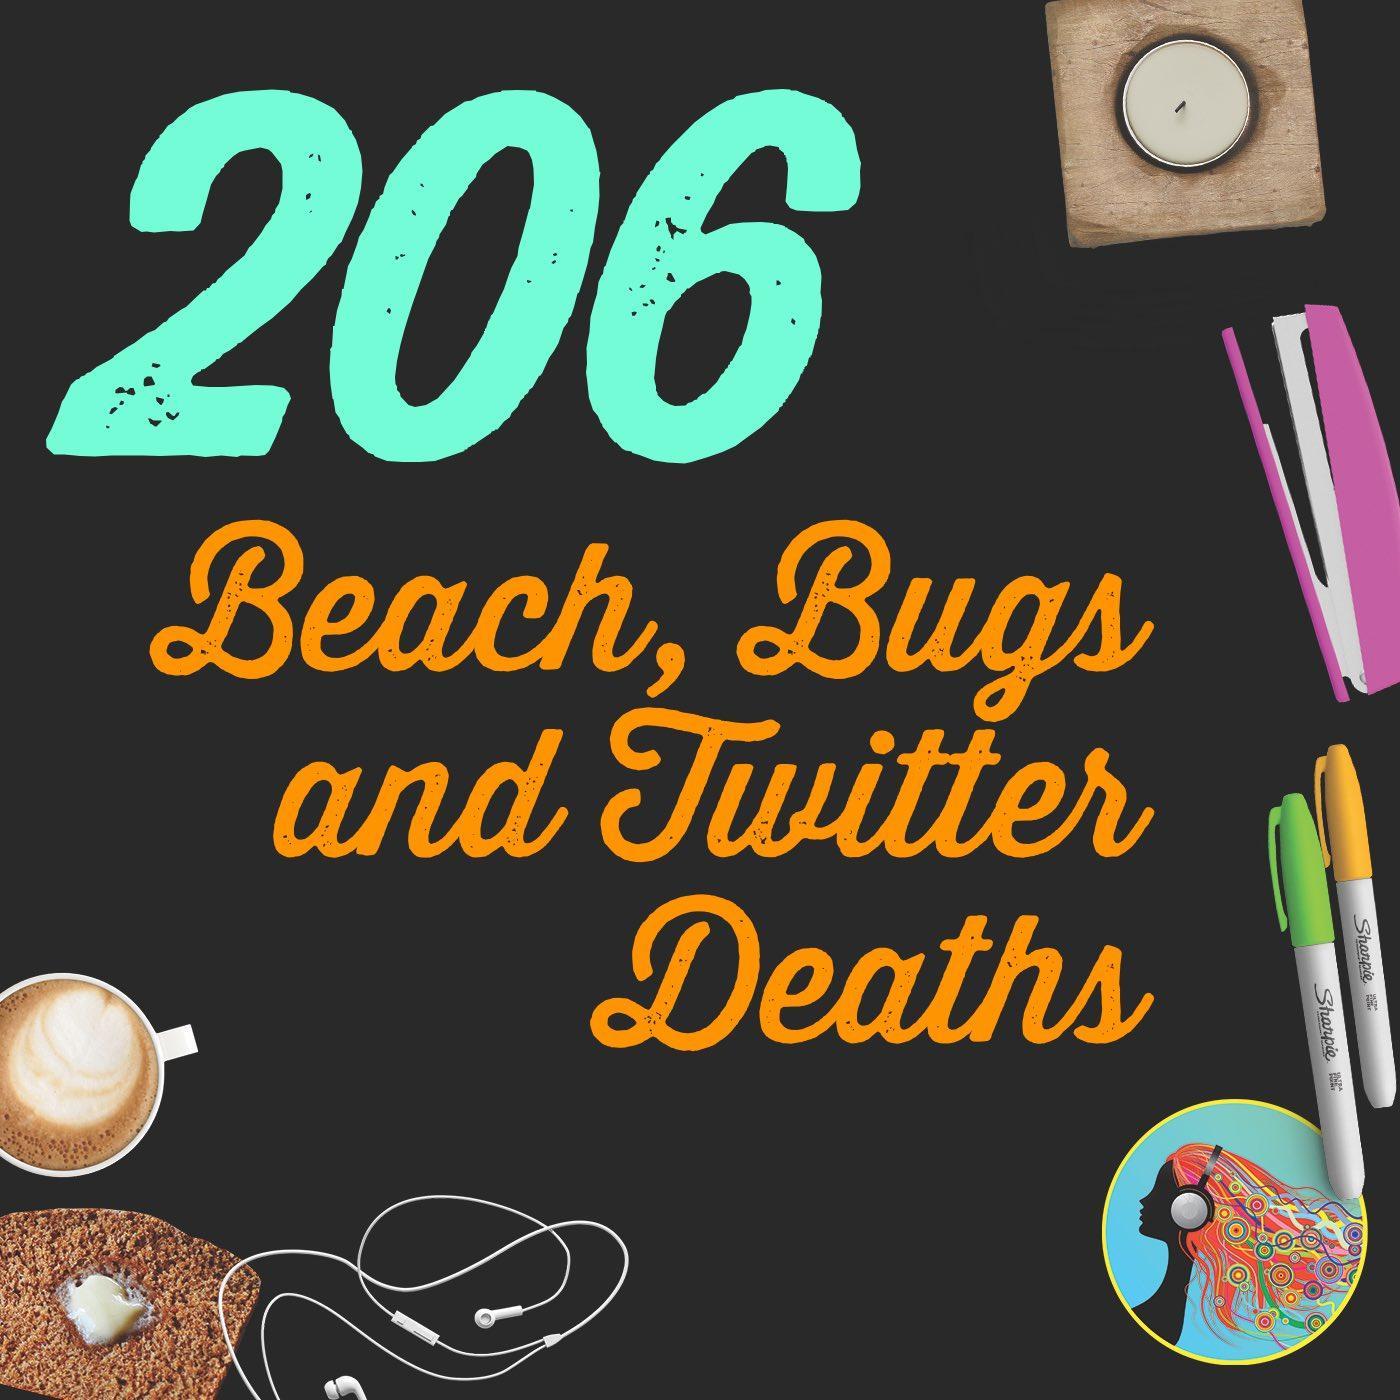 206 Beach, Bugs and Twitter Deaths